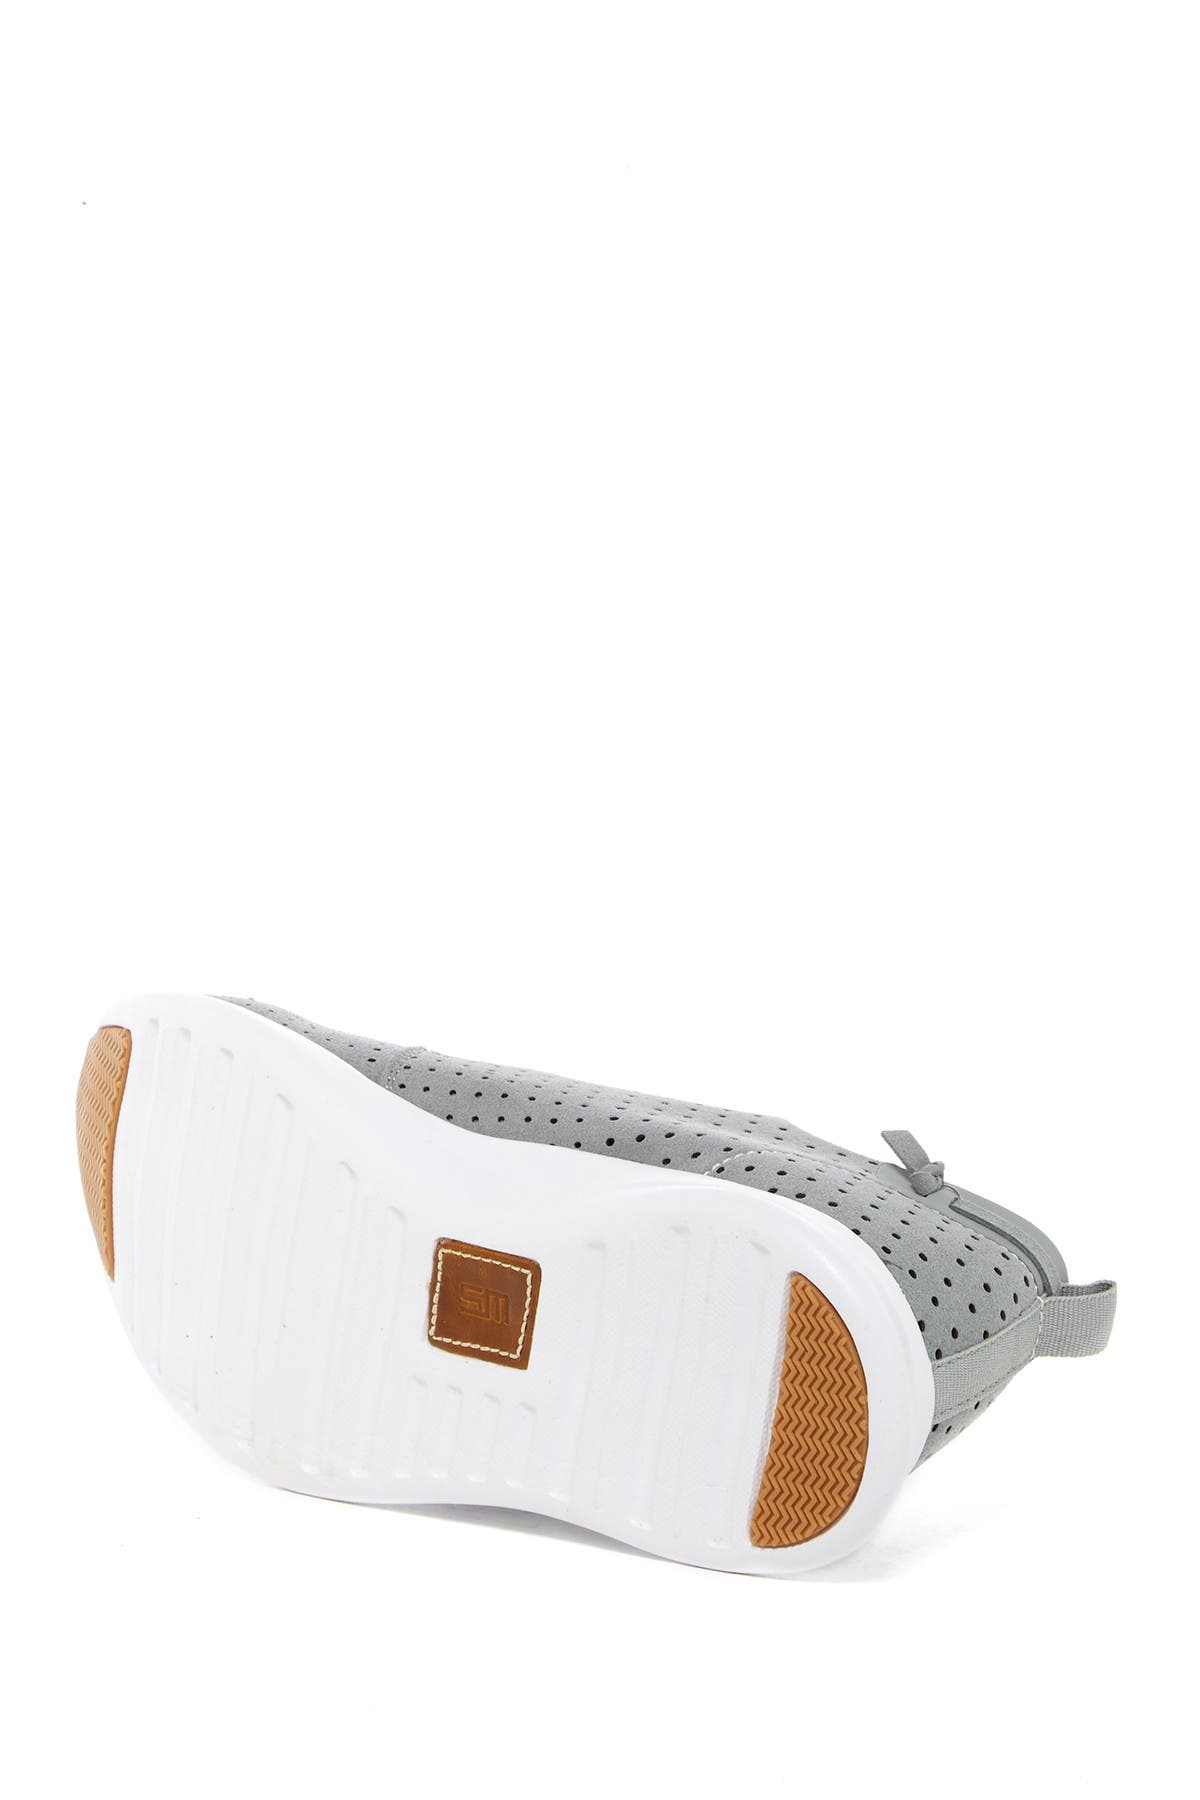 steve madden chyll perforated sneaker